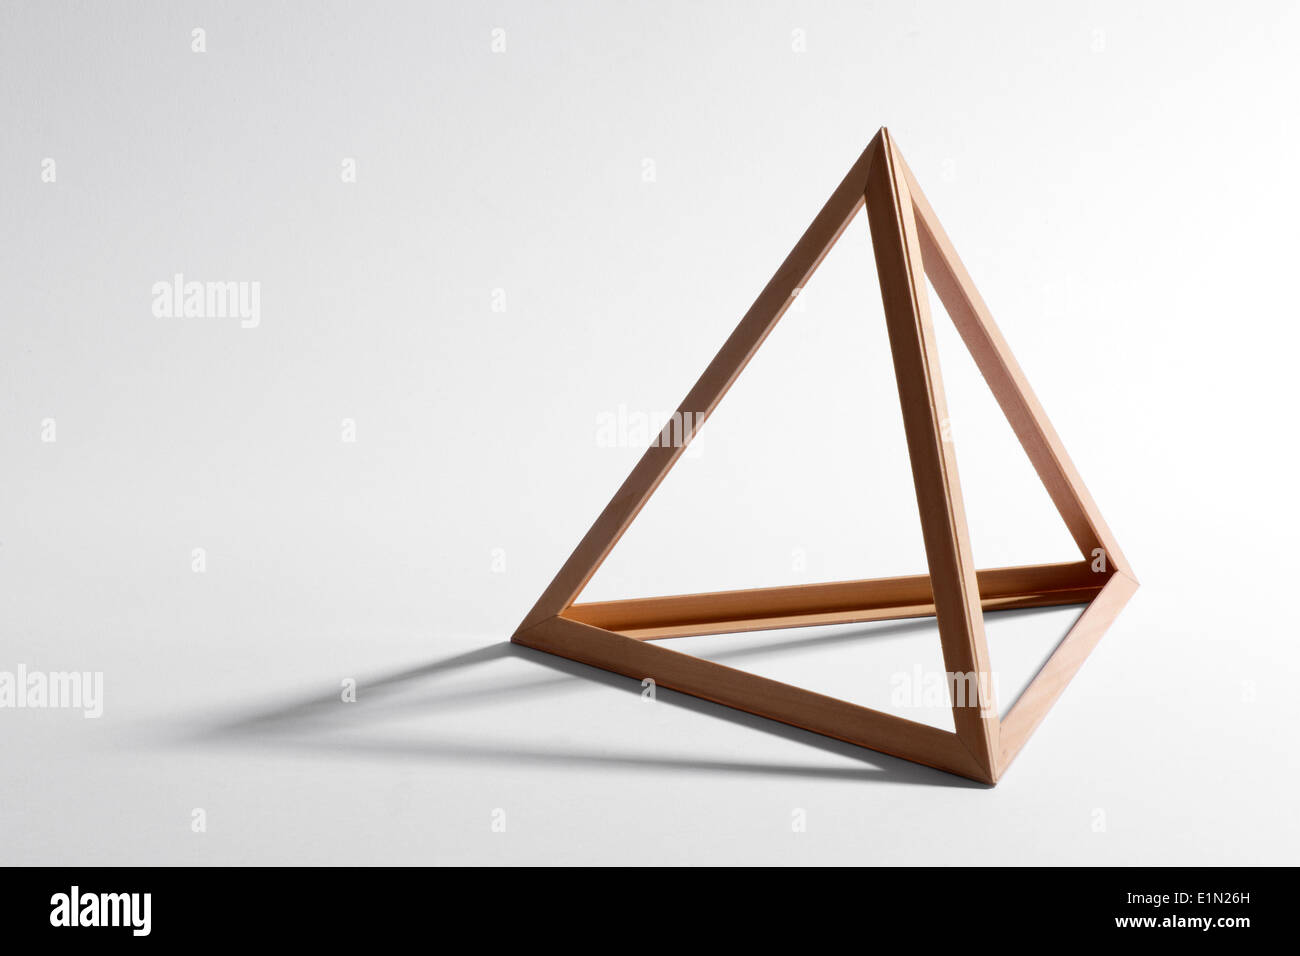 Open empty wooden triangular frame or pyramid shape Stock Photo